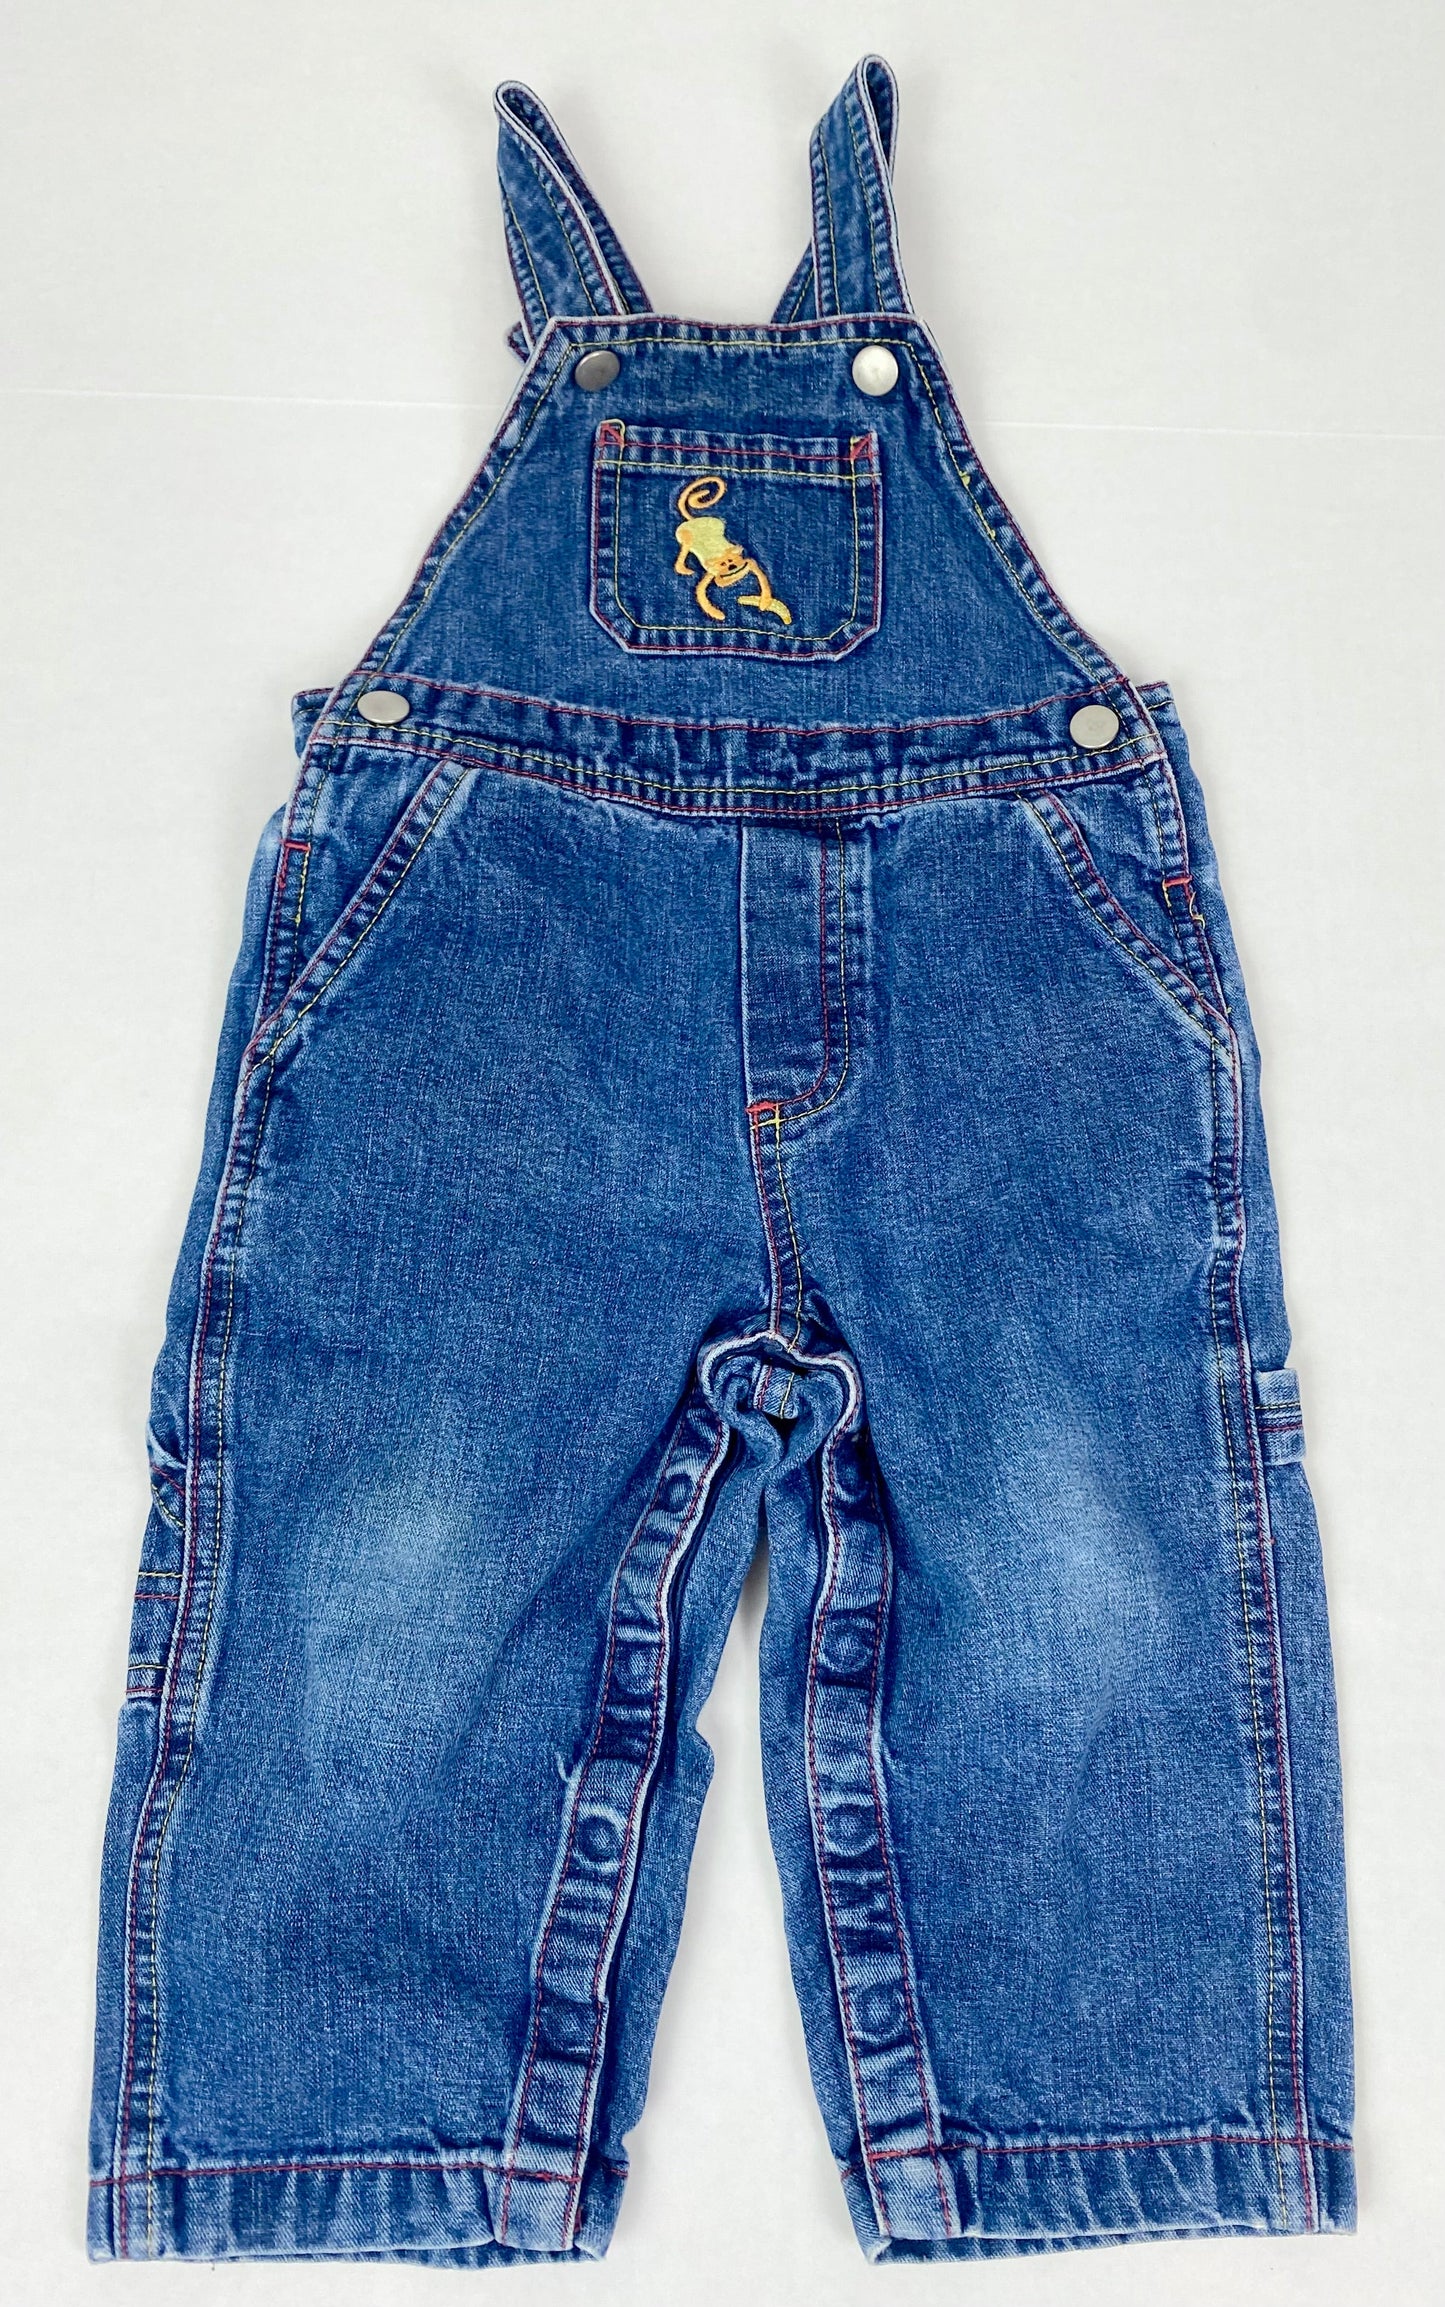 12-18 months Sz 80 Hanna Andersson denim overalls with monkey